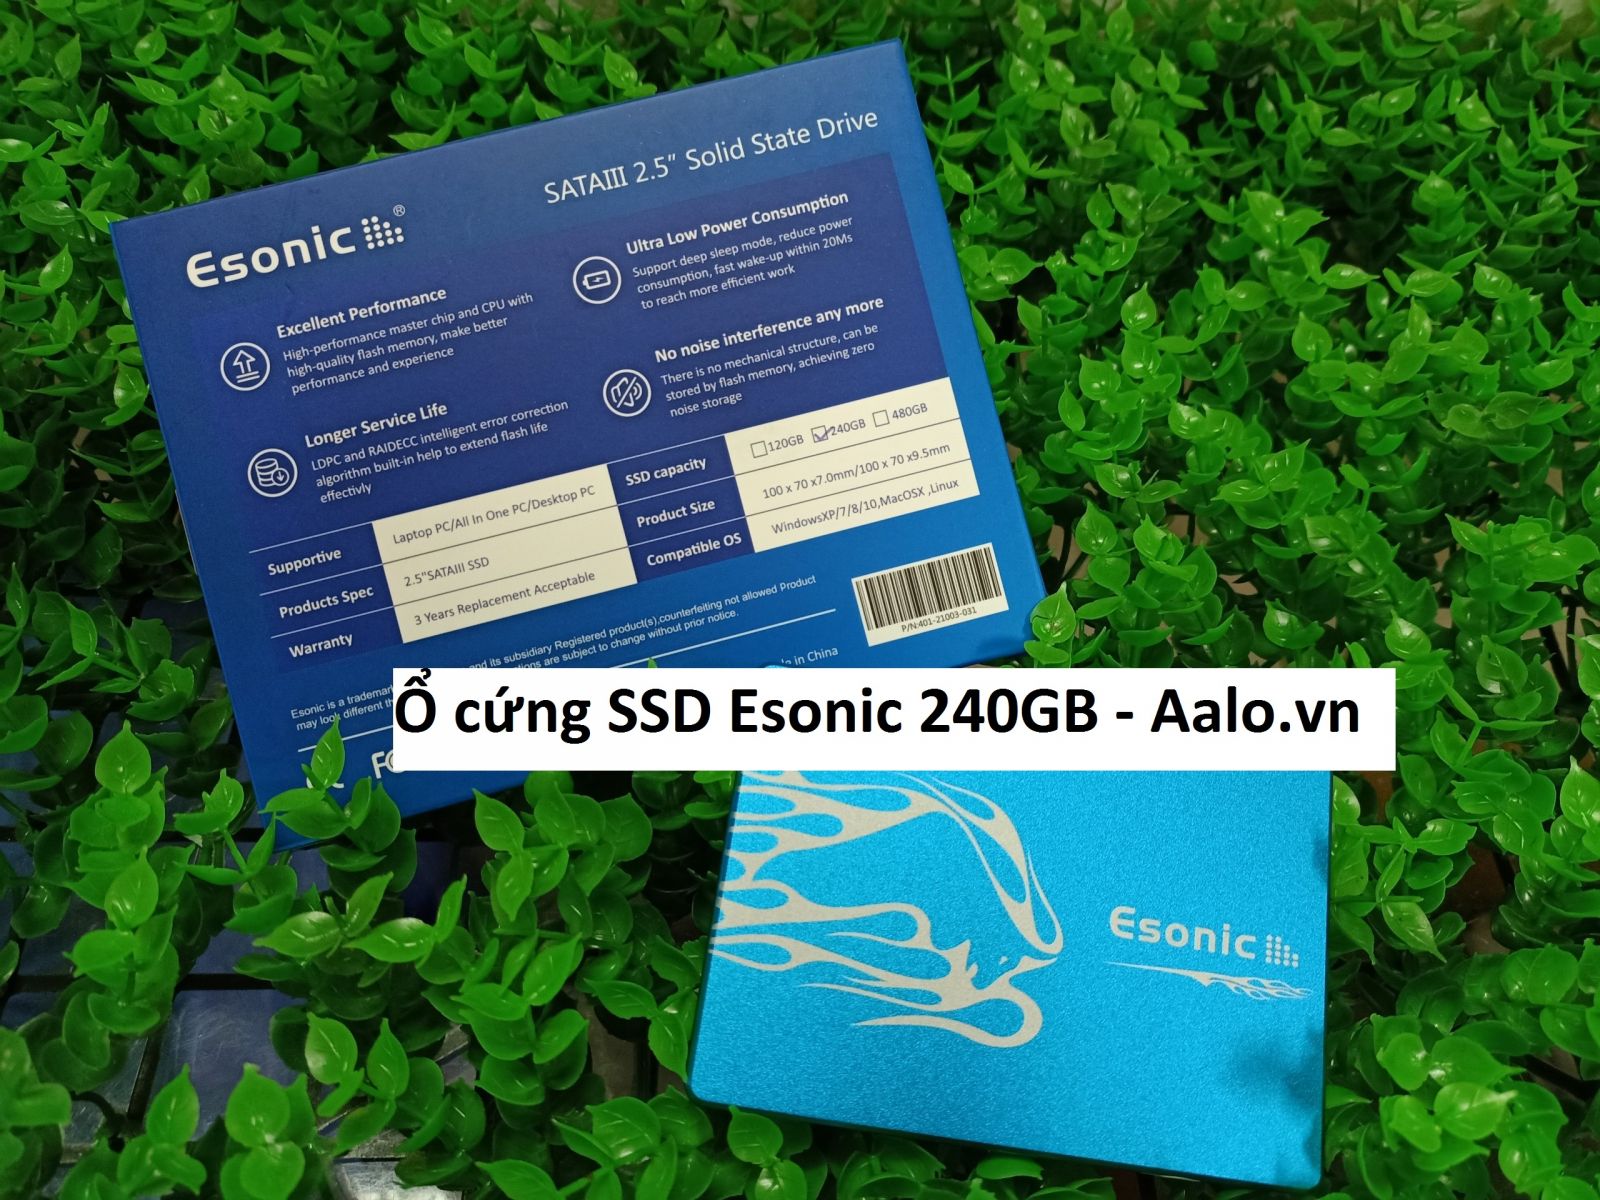 Ổ cứng SSD Esonic 240GB - Aalo.vn